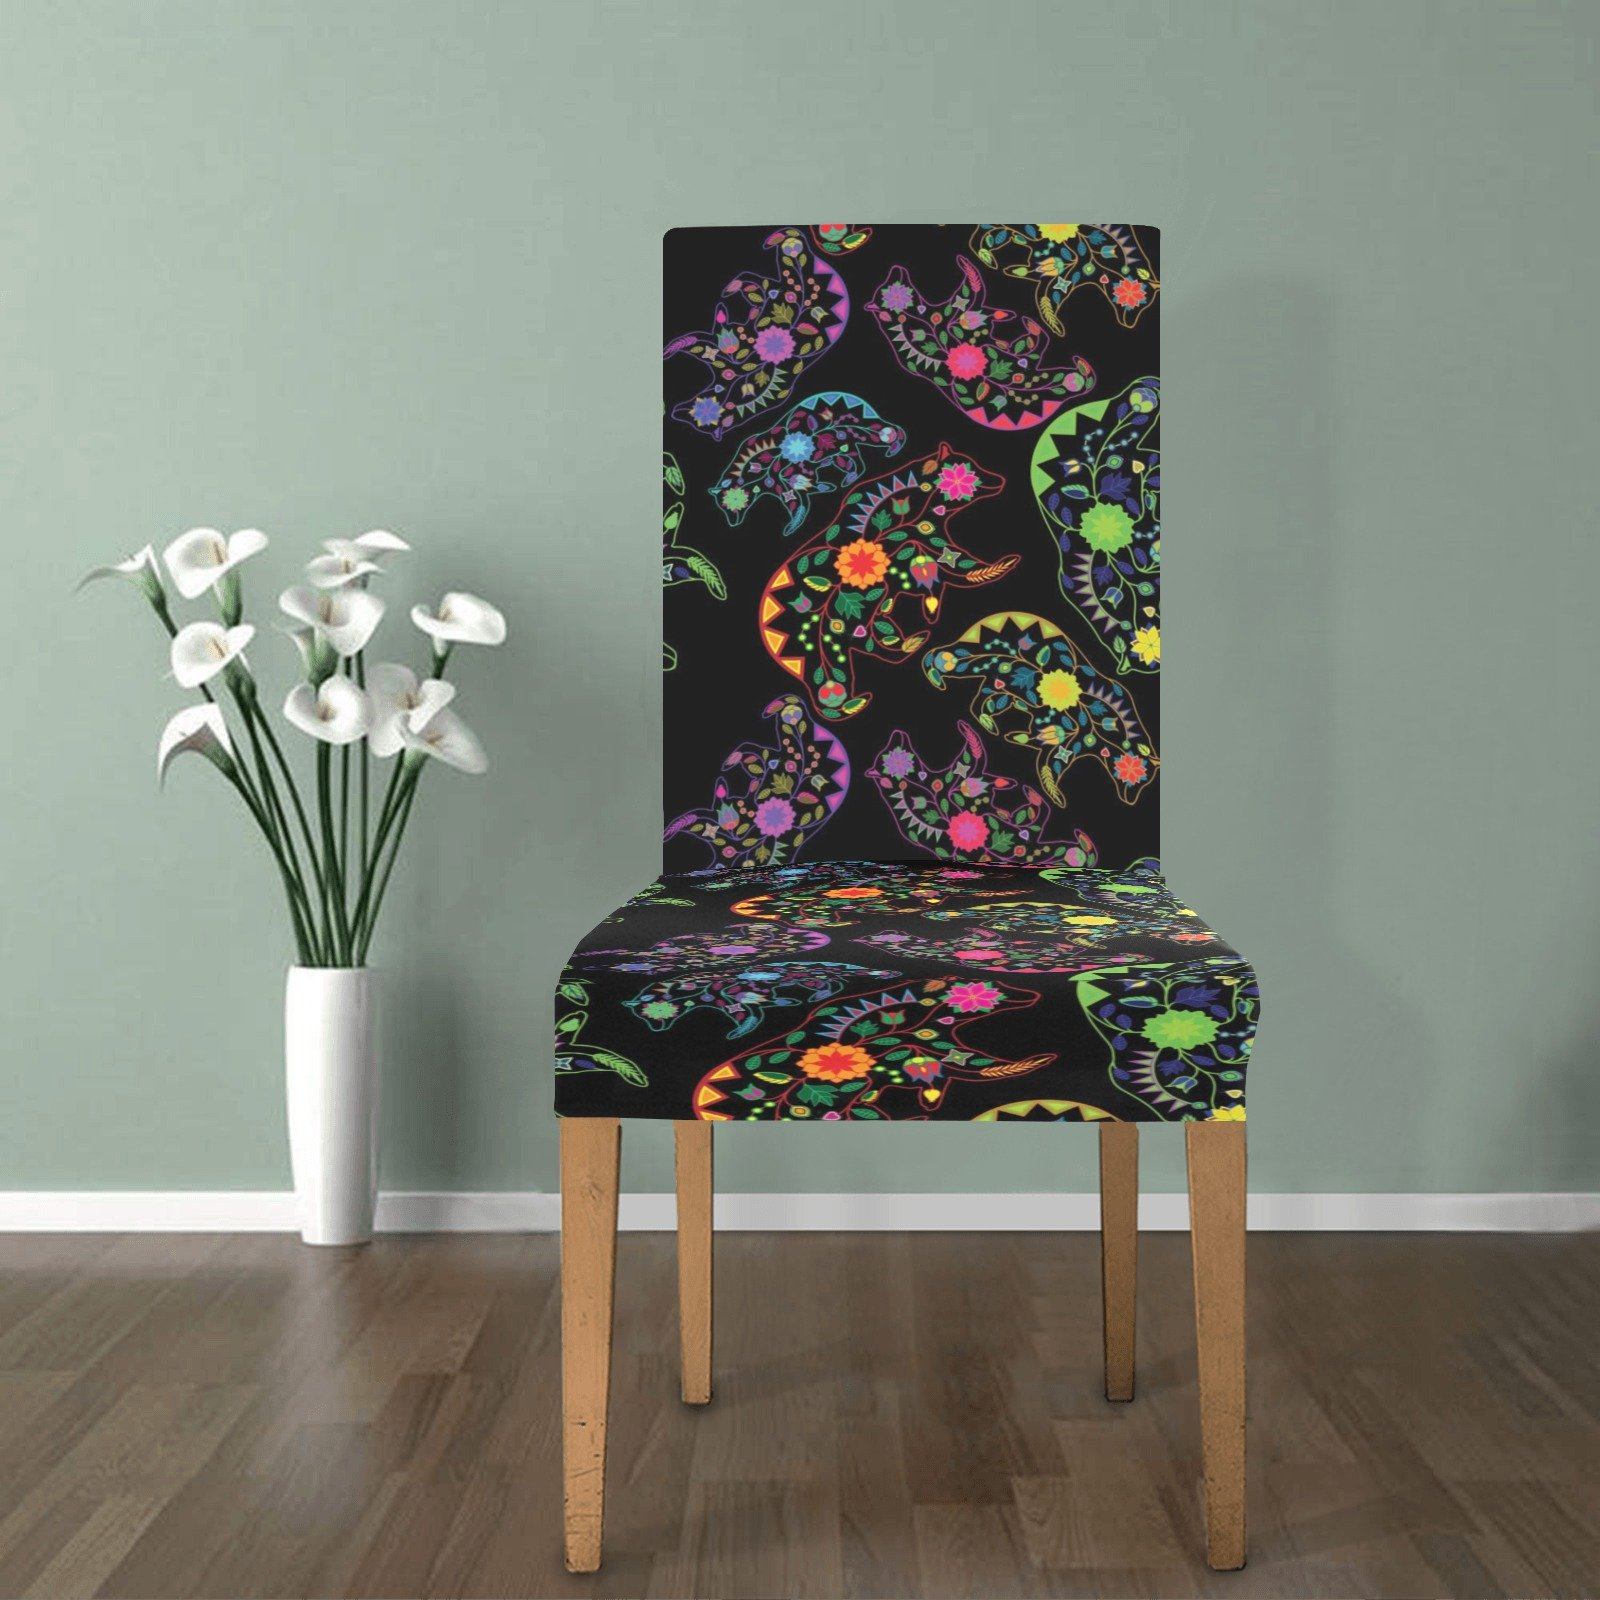 Floral Bear Chair Cover (Pack of 6) Chair Cover (Pack of 6) e-joyer 